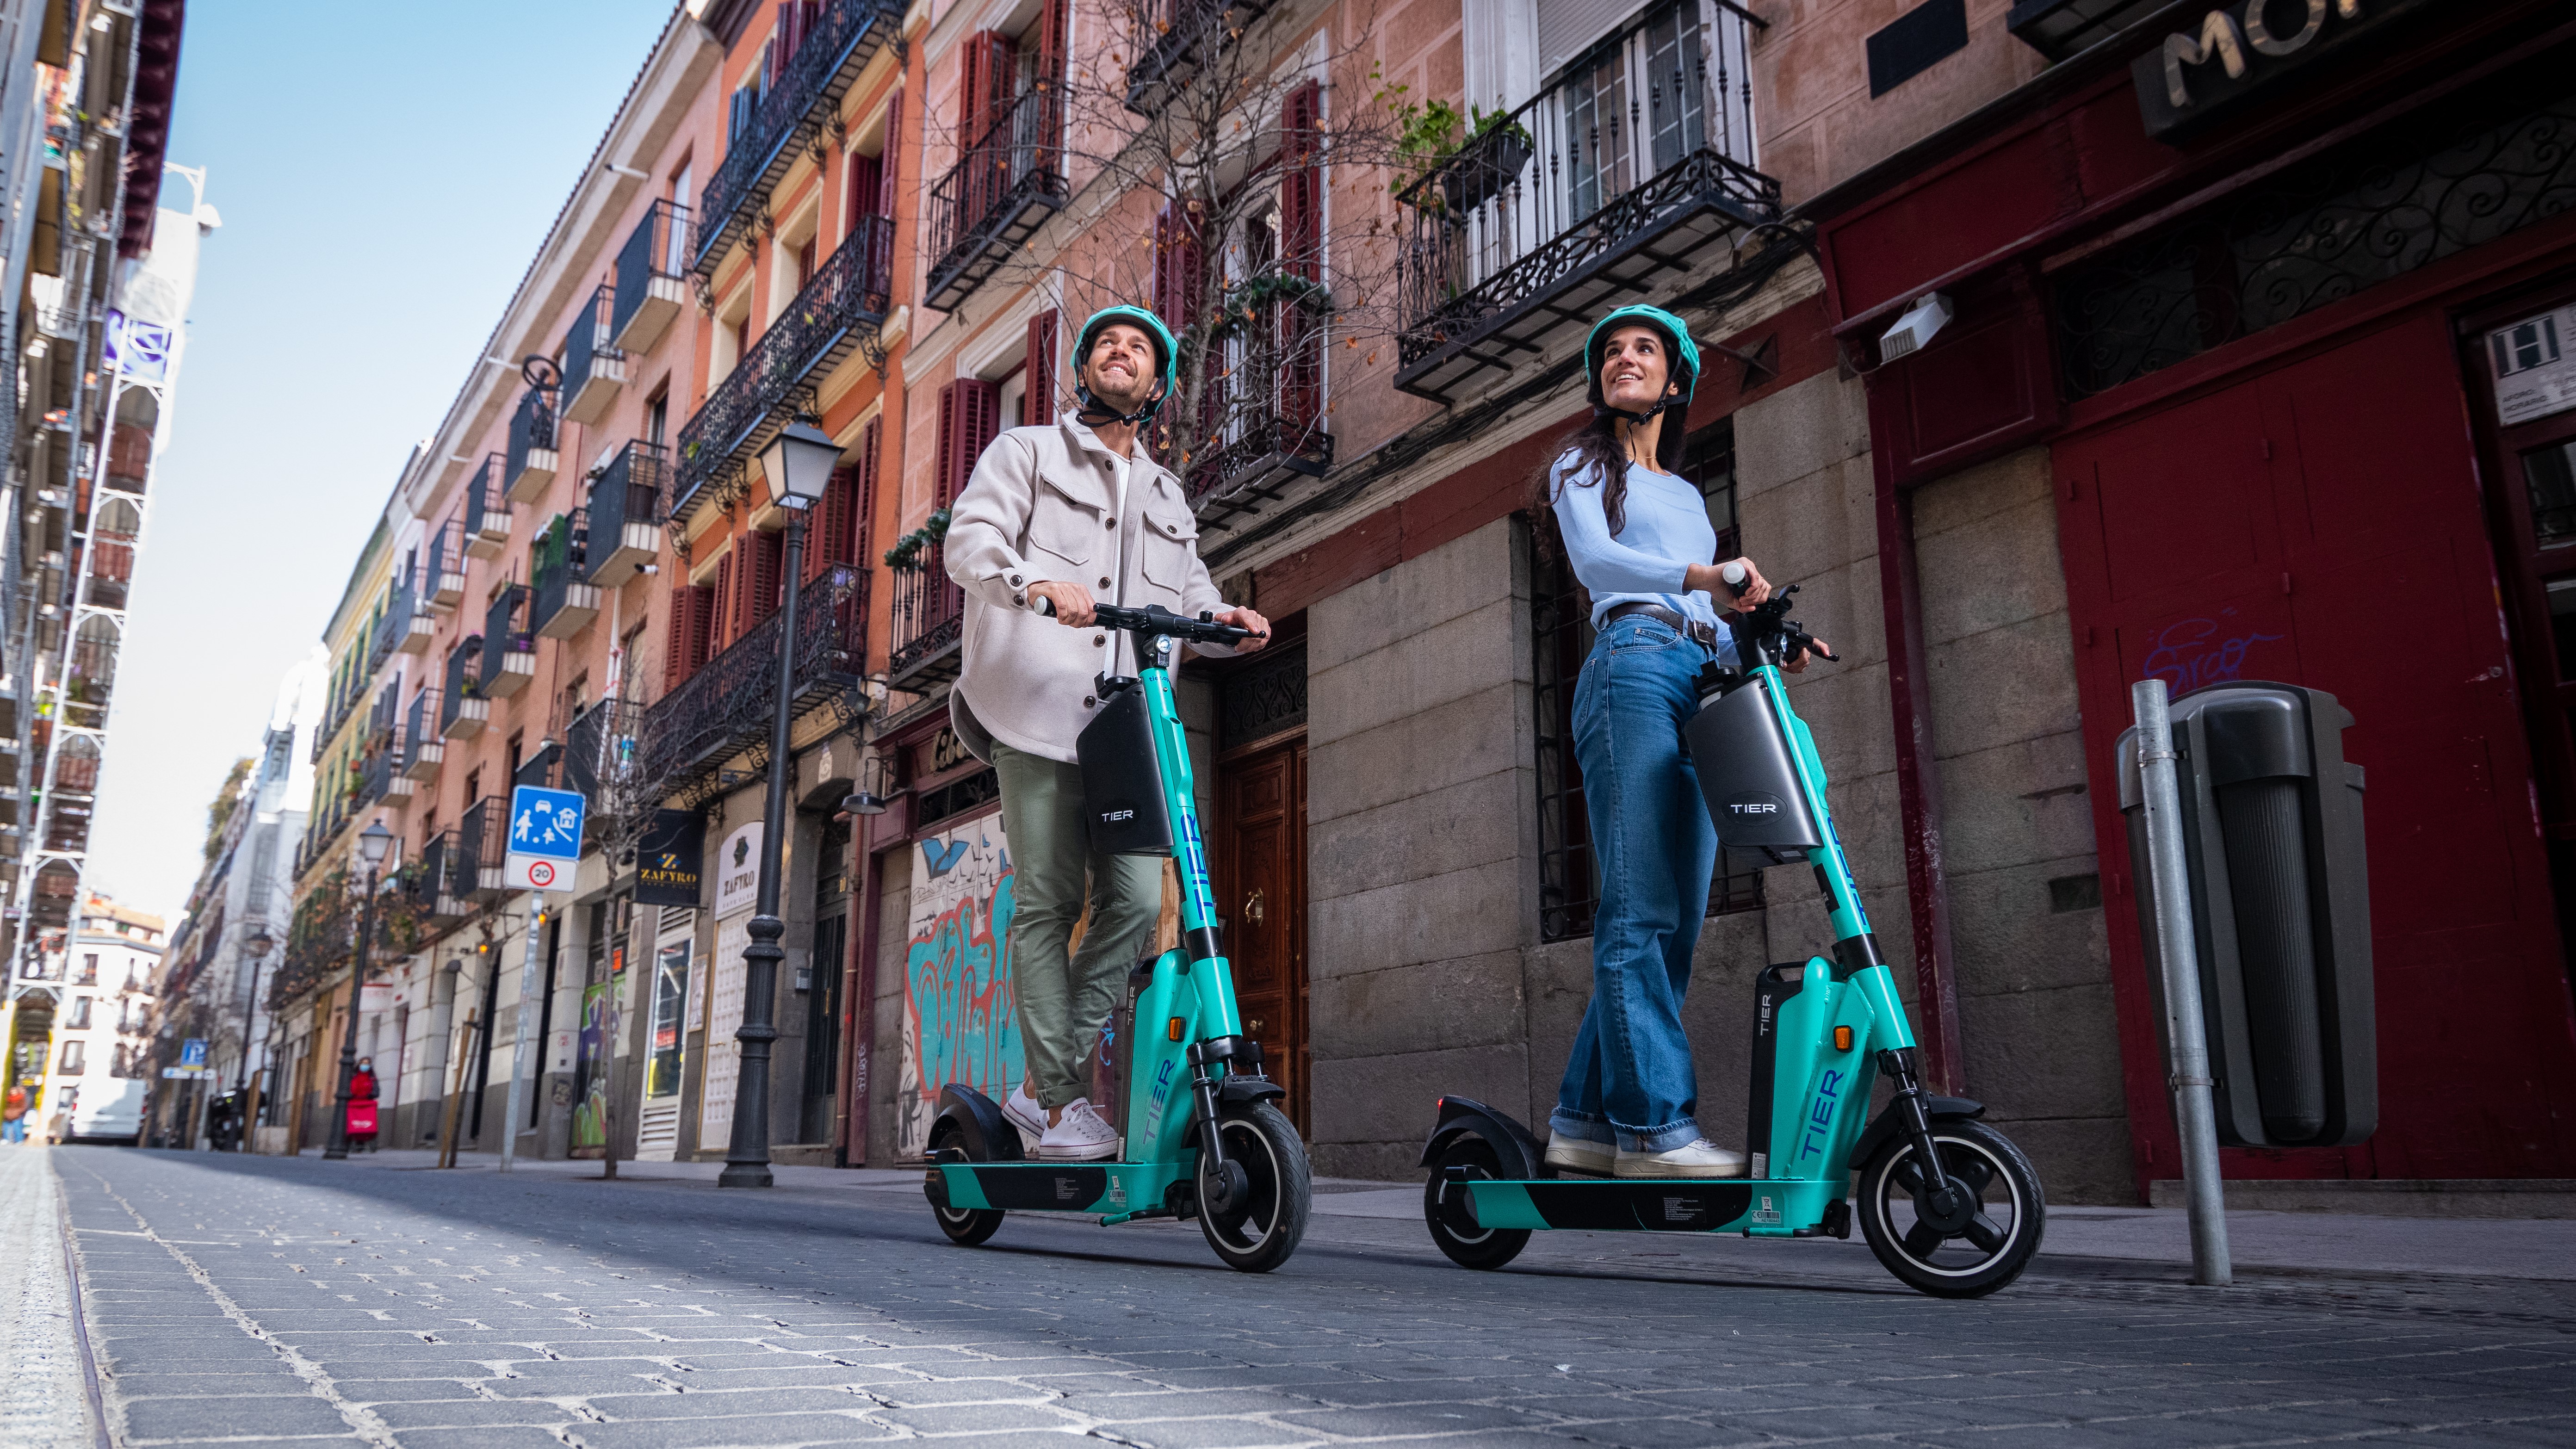 E-scooters, Urban mobility